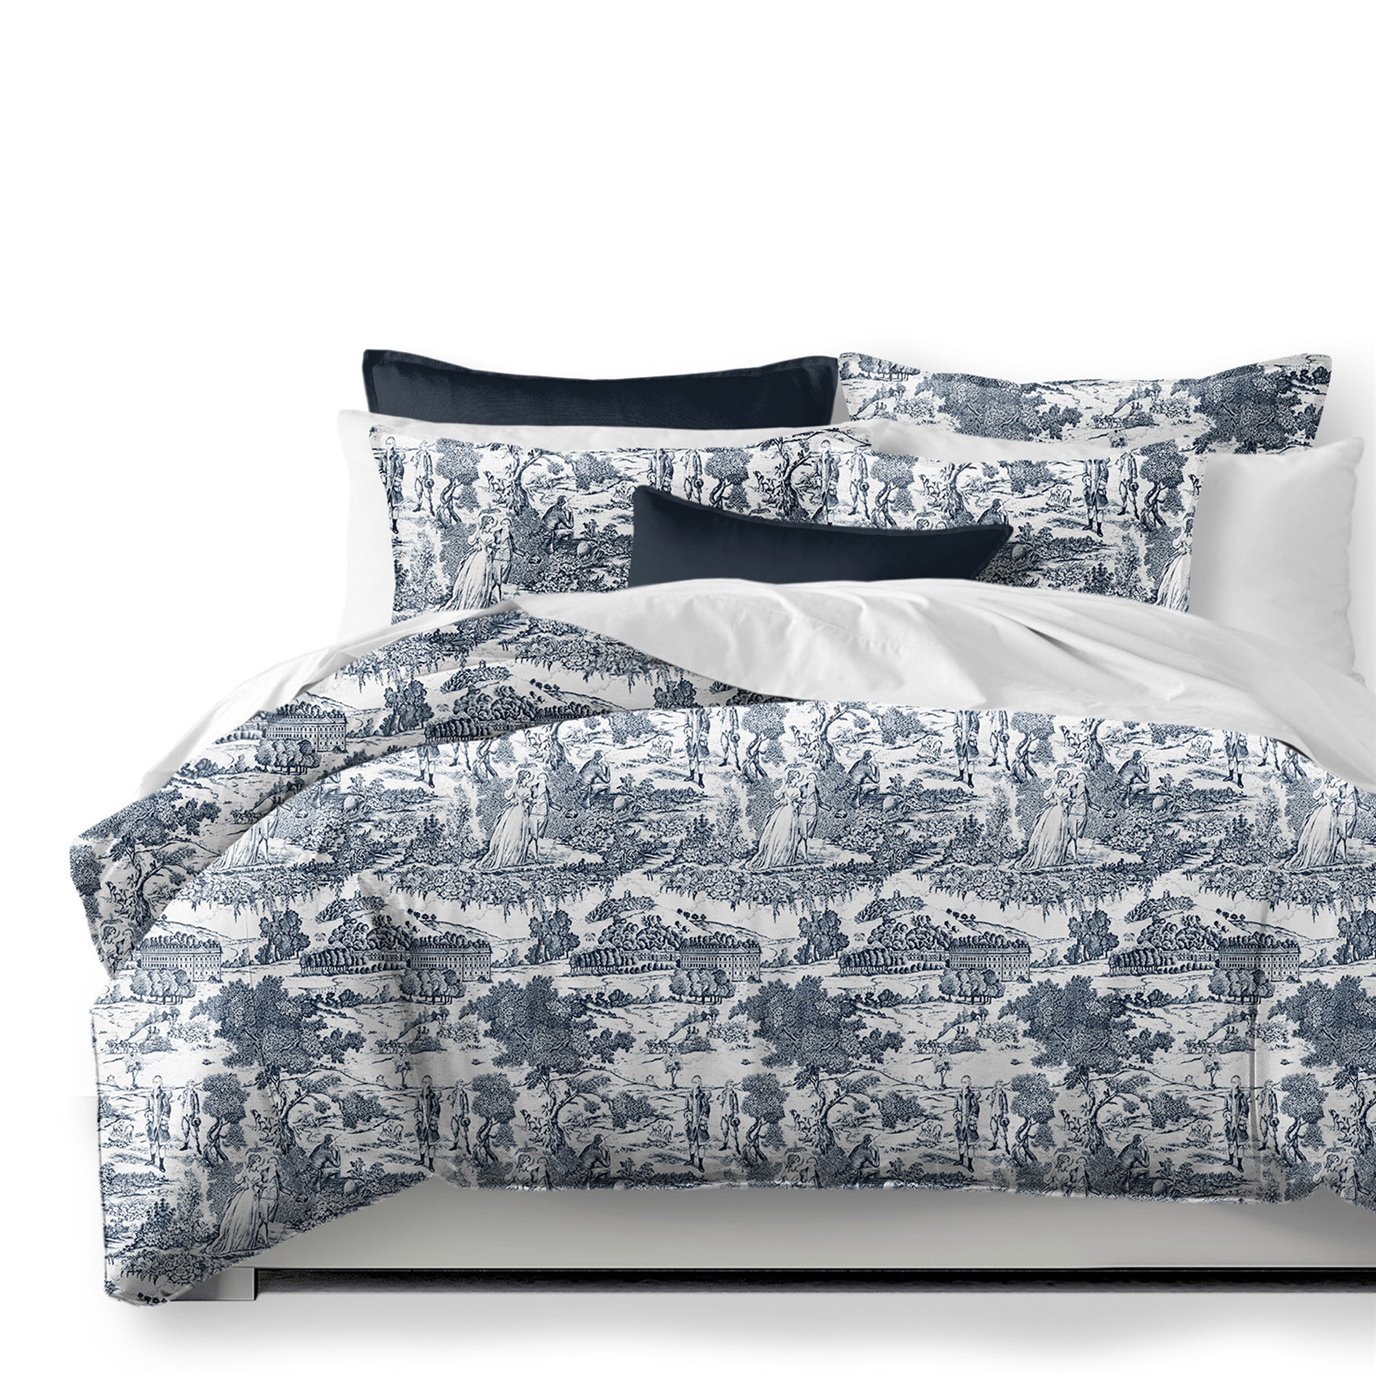 Beau Toile Blue Coverlet and Pillow Sham(s) Set - Size Super King